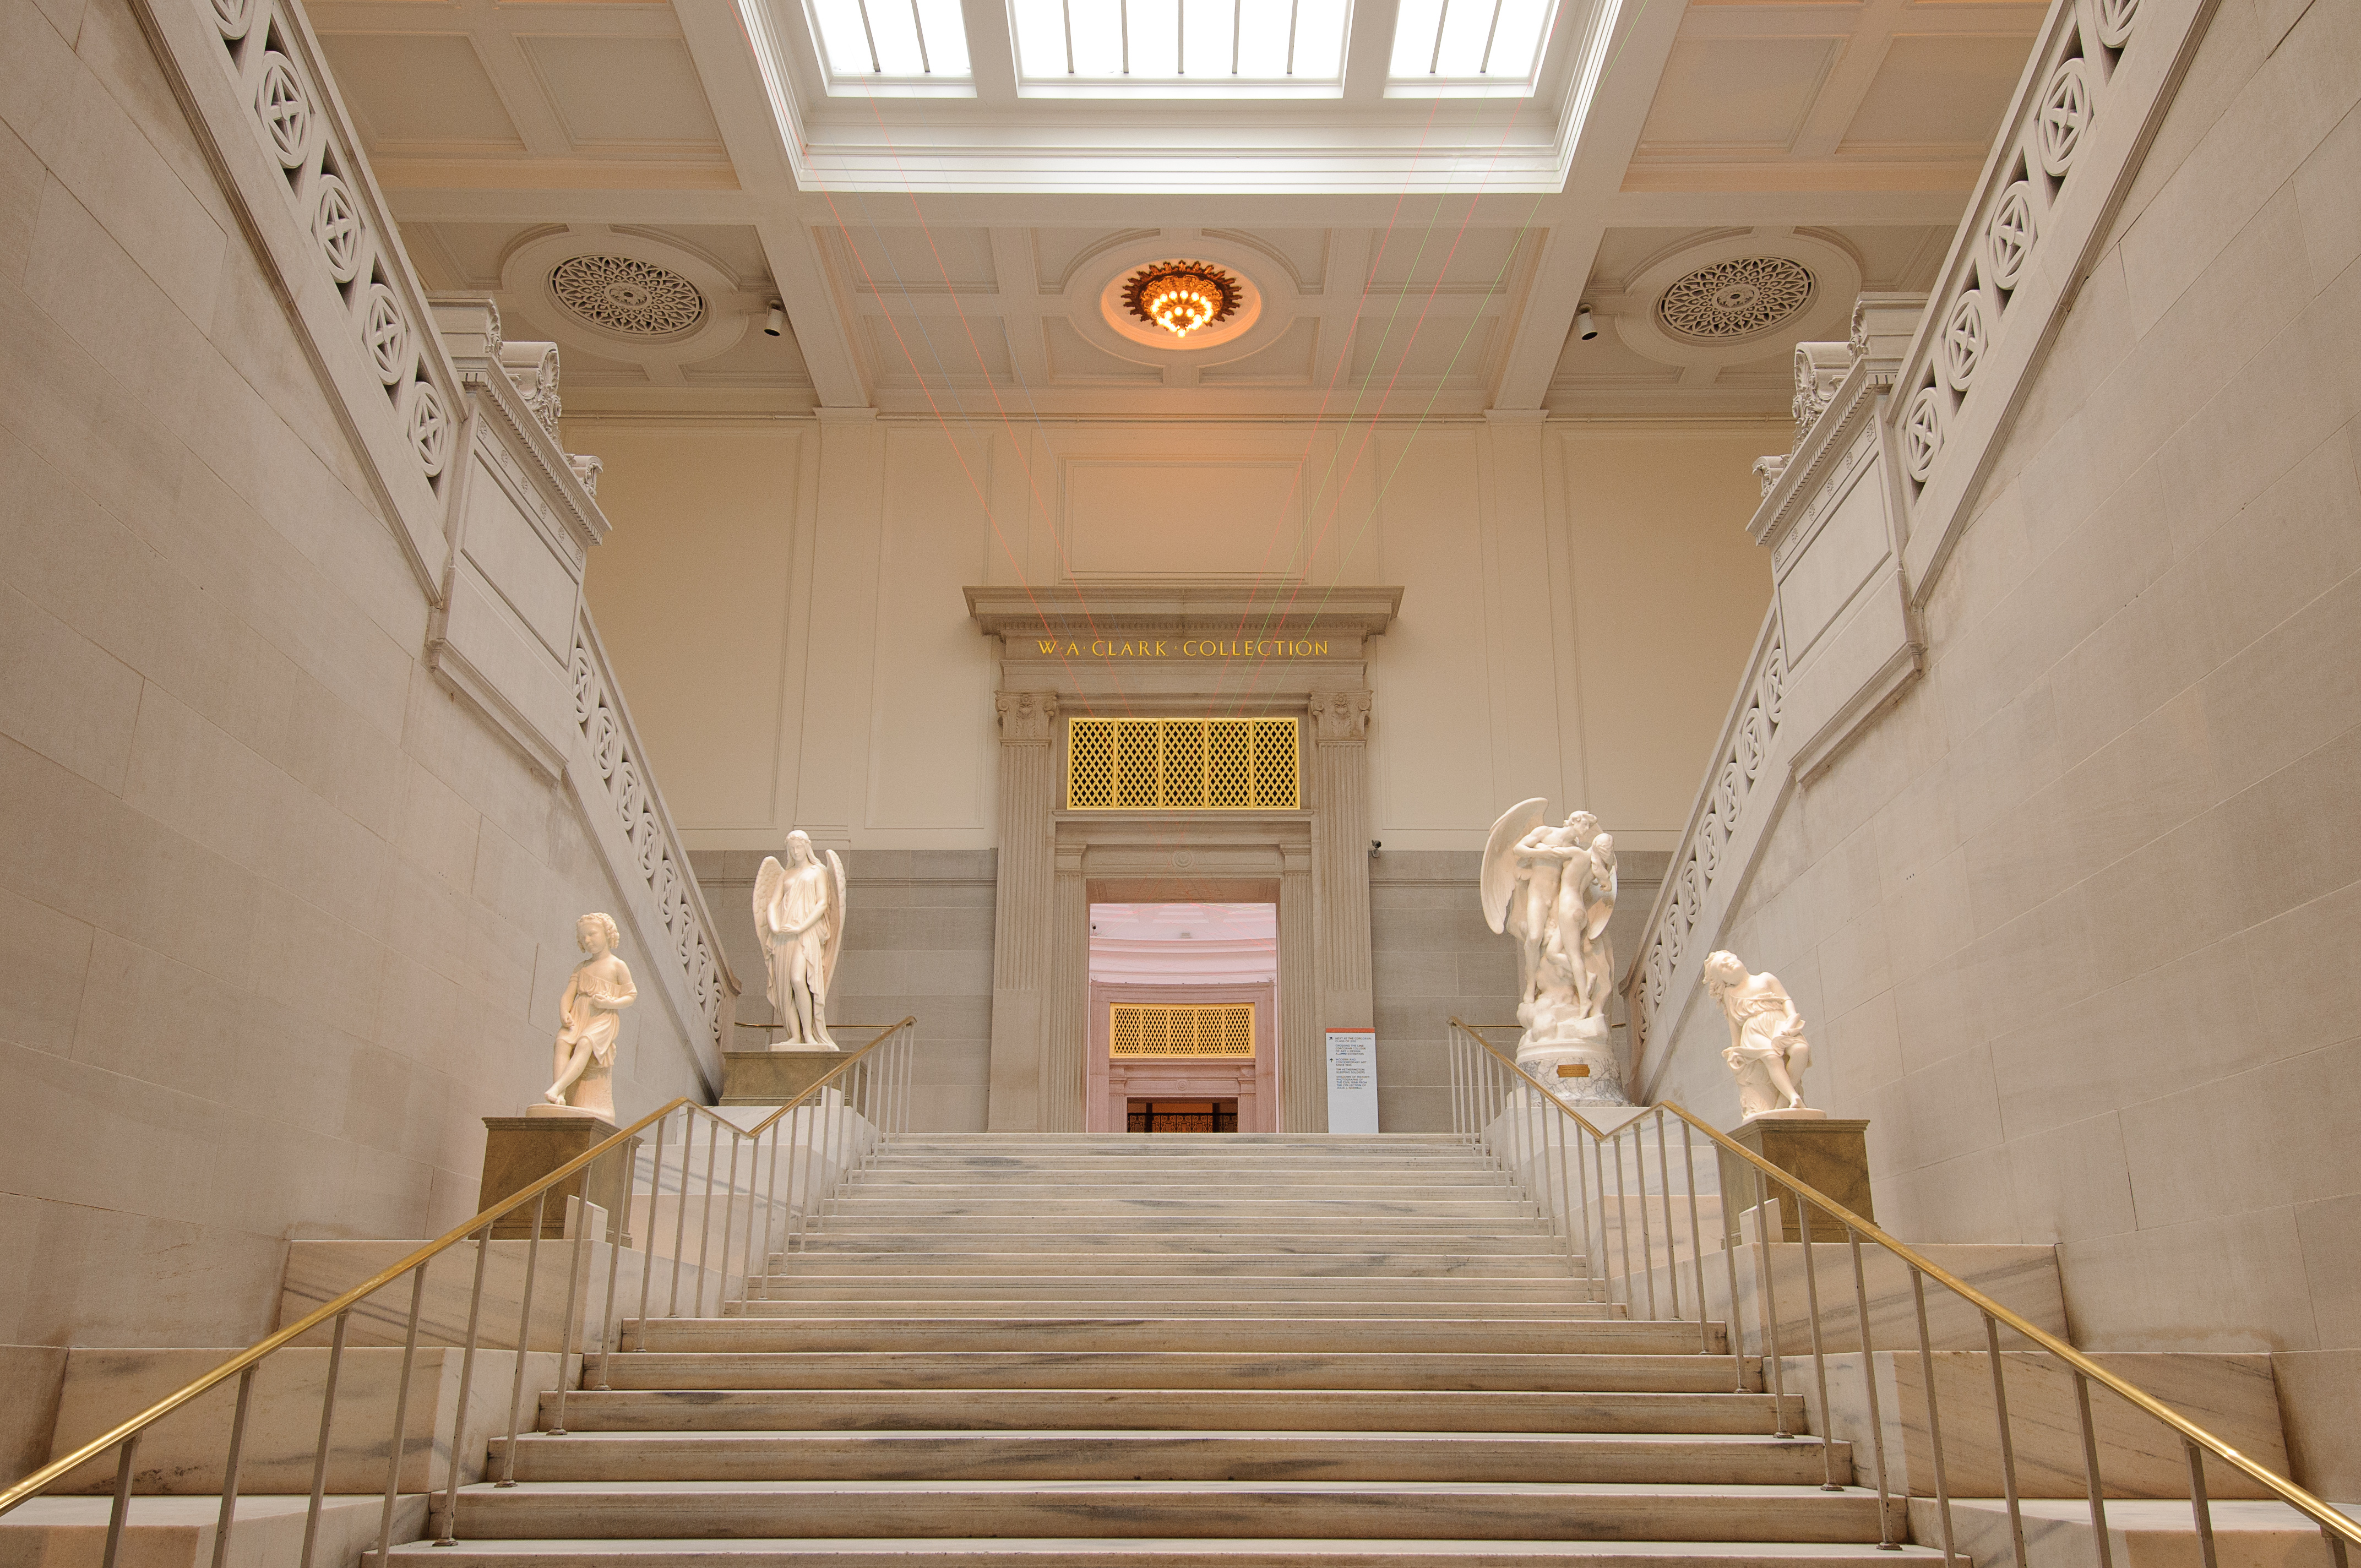 Grand staircase at the Corcoran, Flagg Building